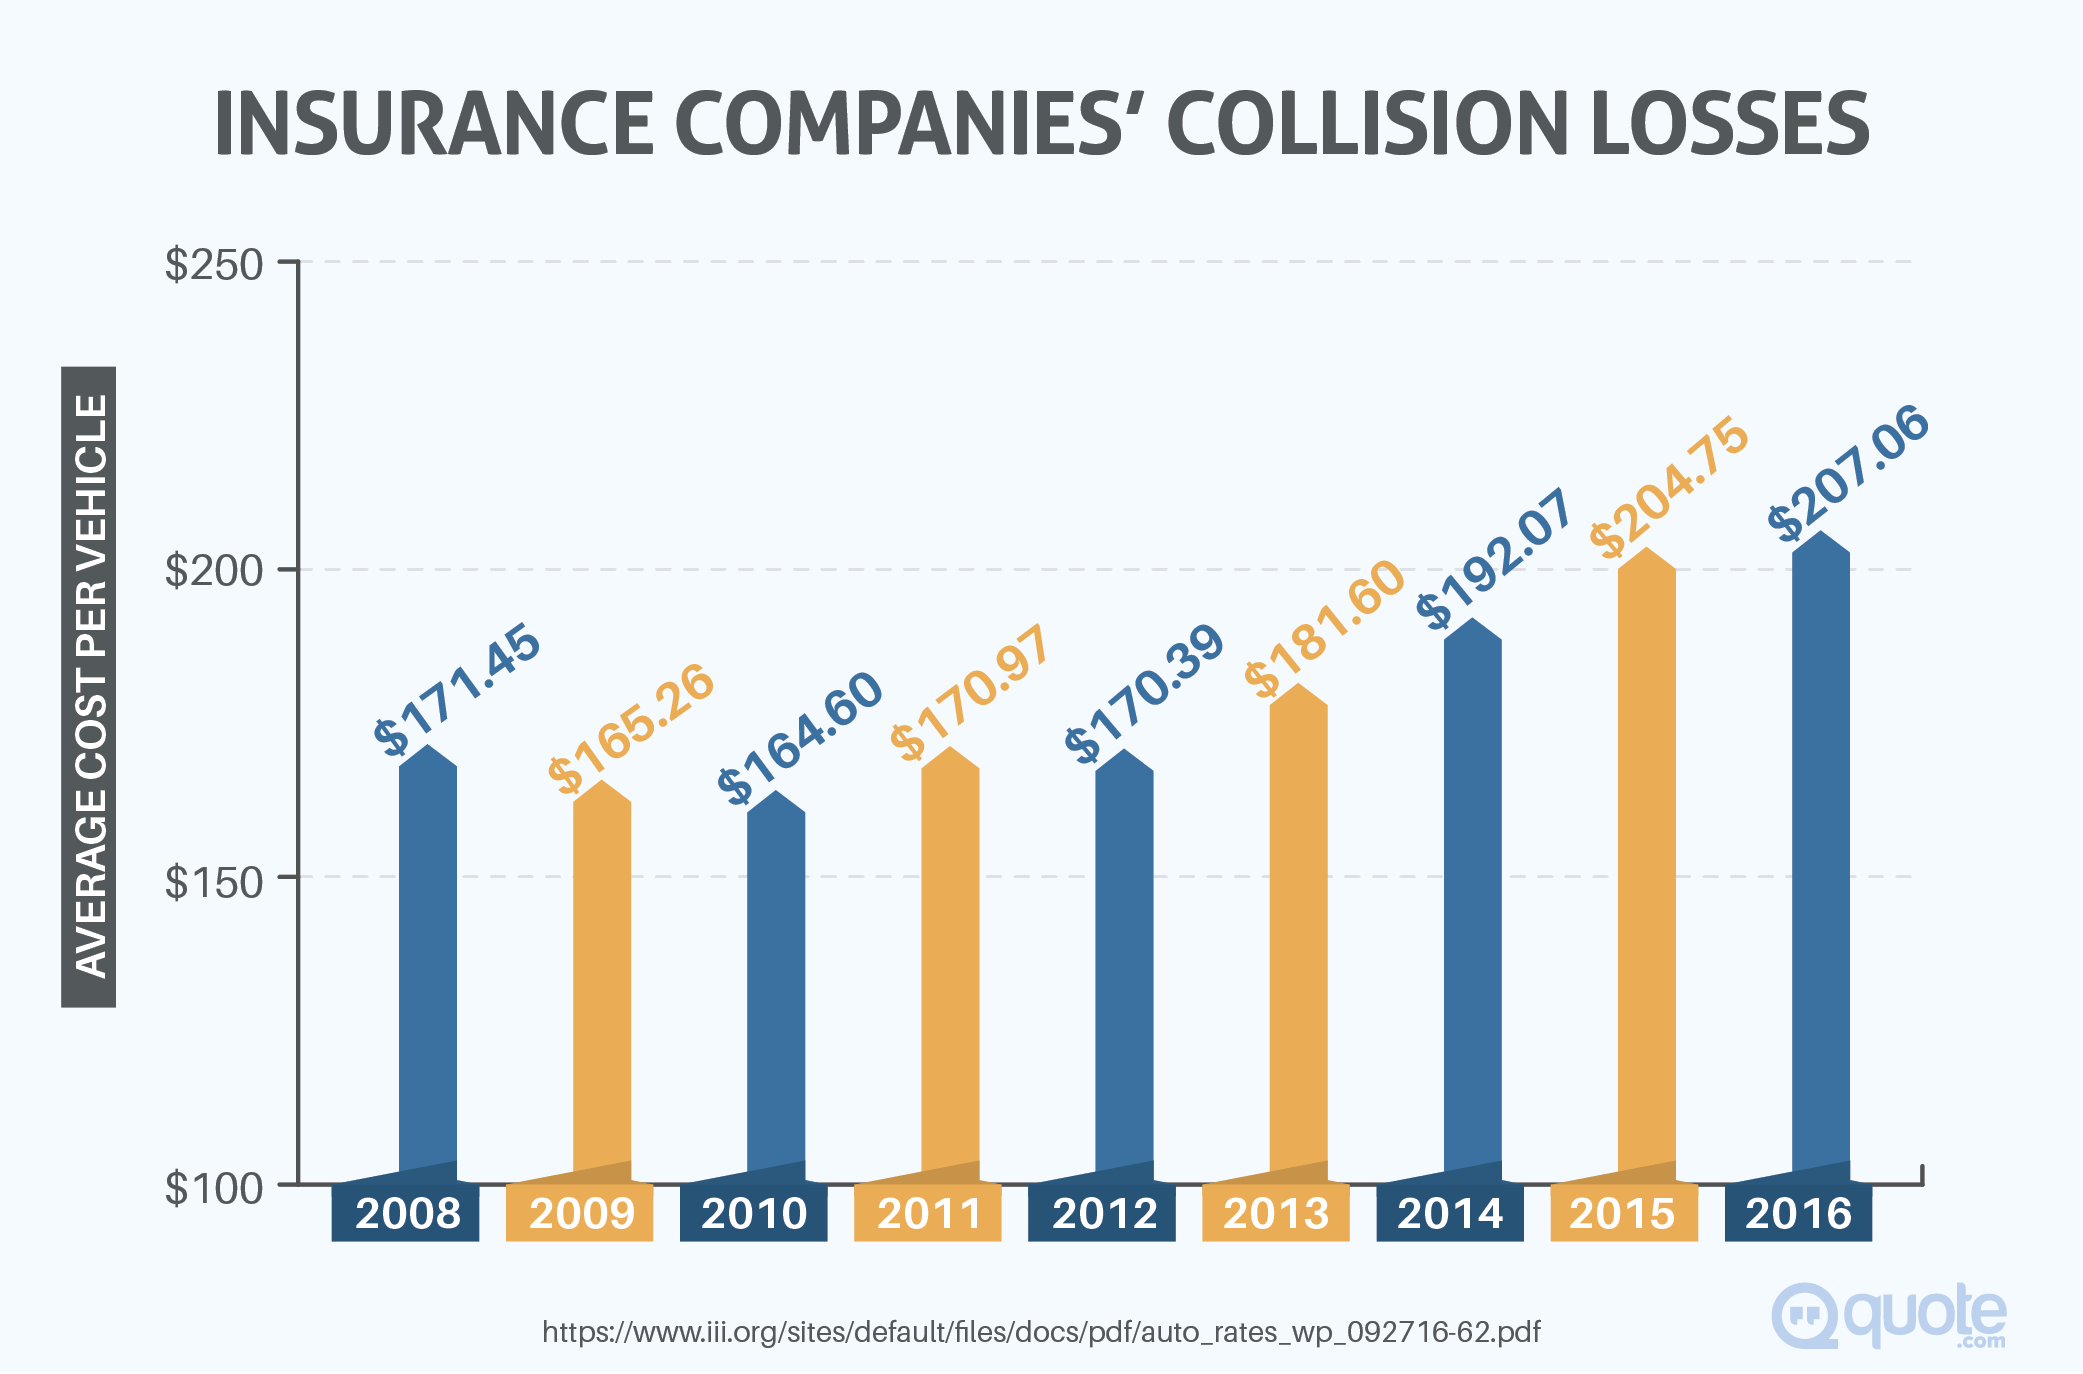 Insurance Companies' Collision Losses from 2008-2016